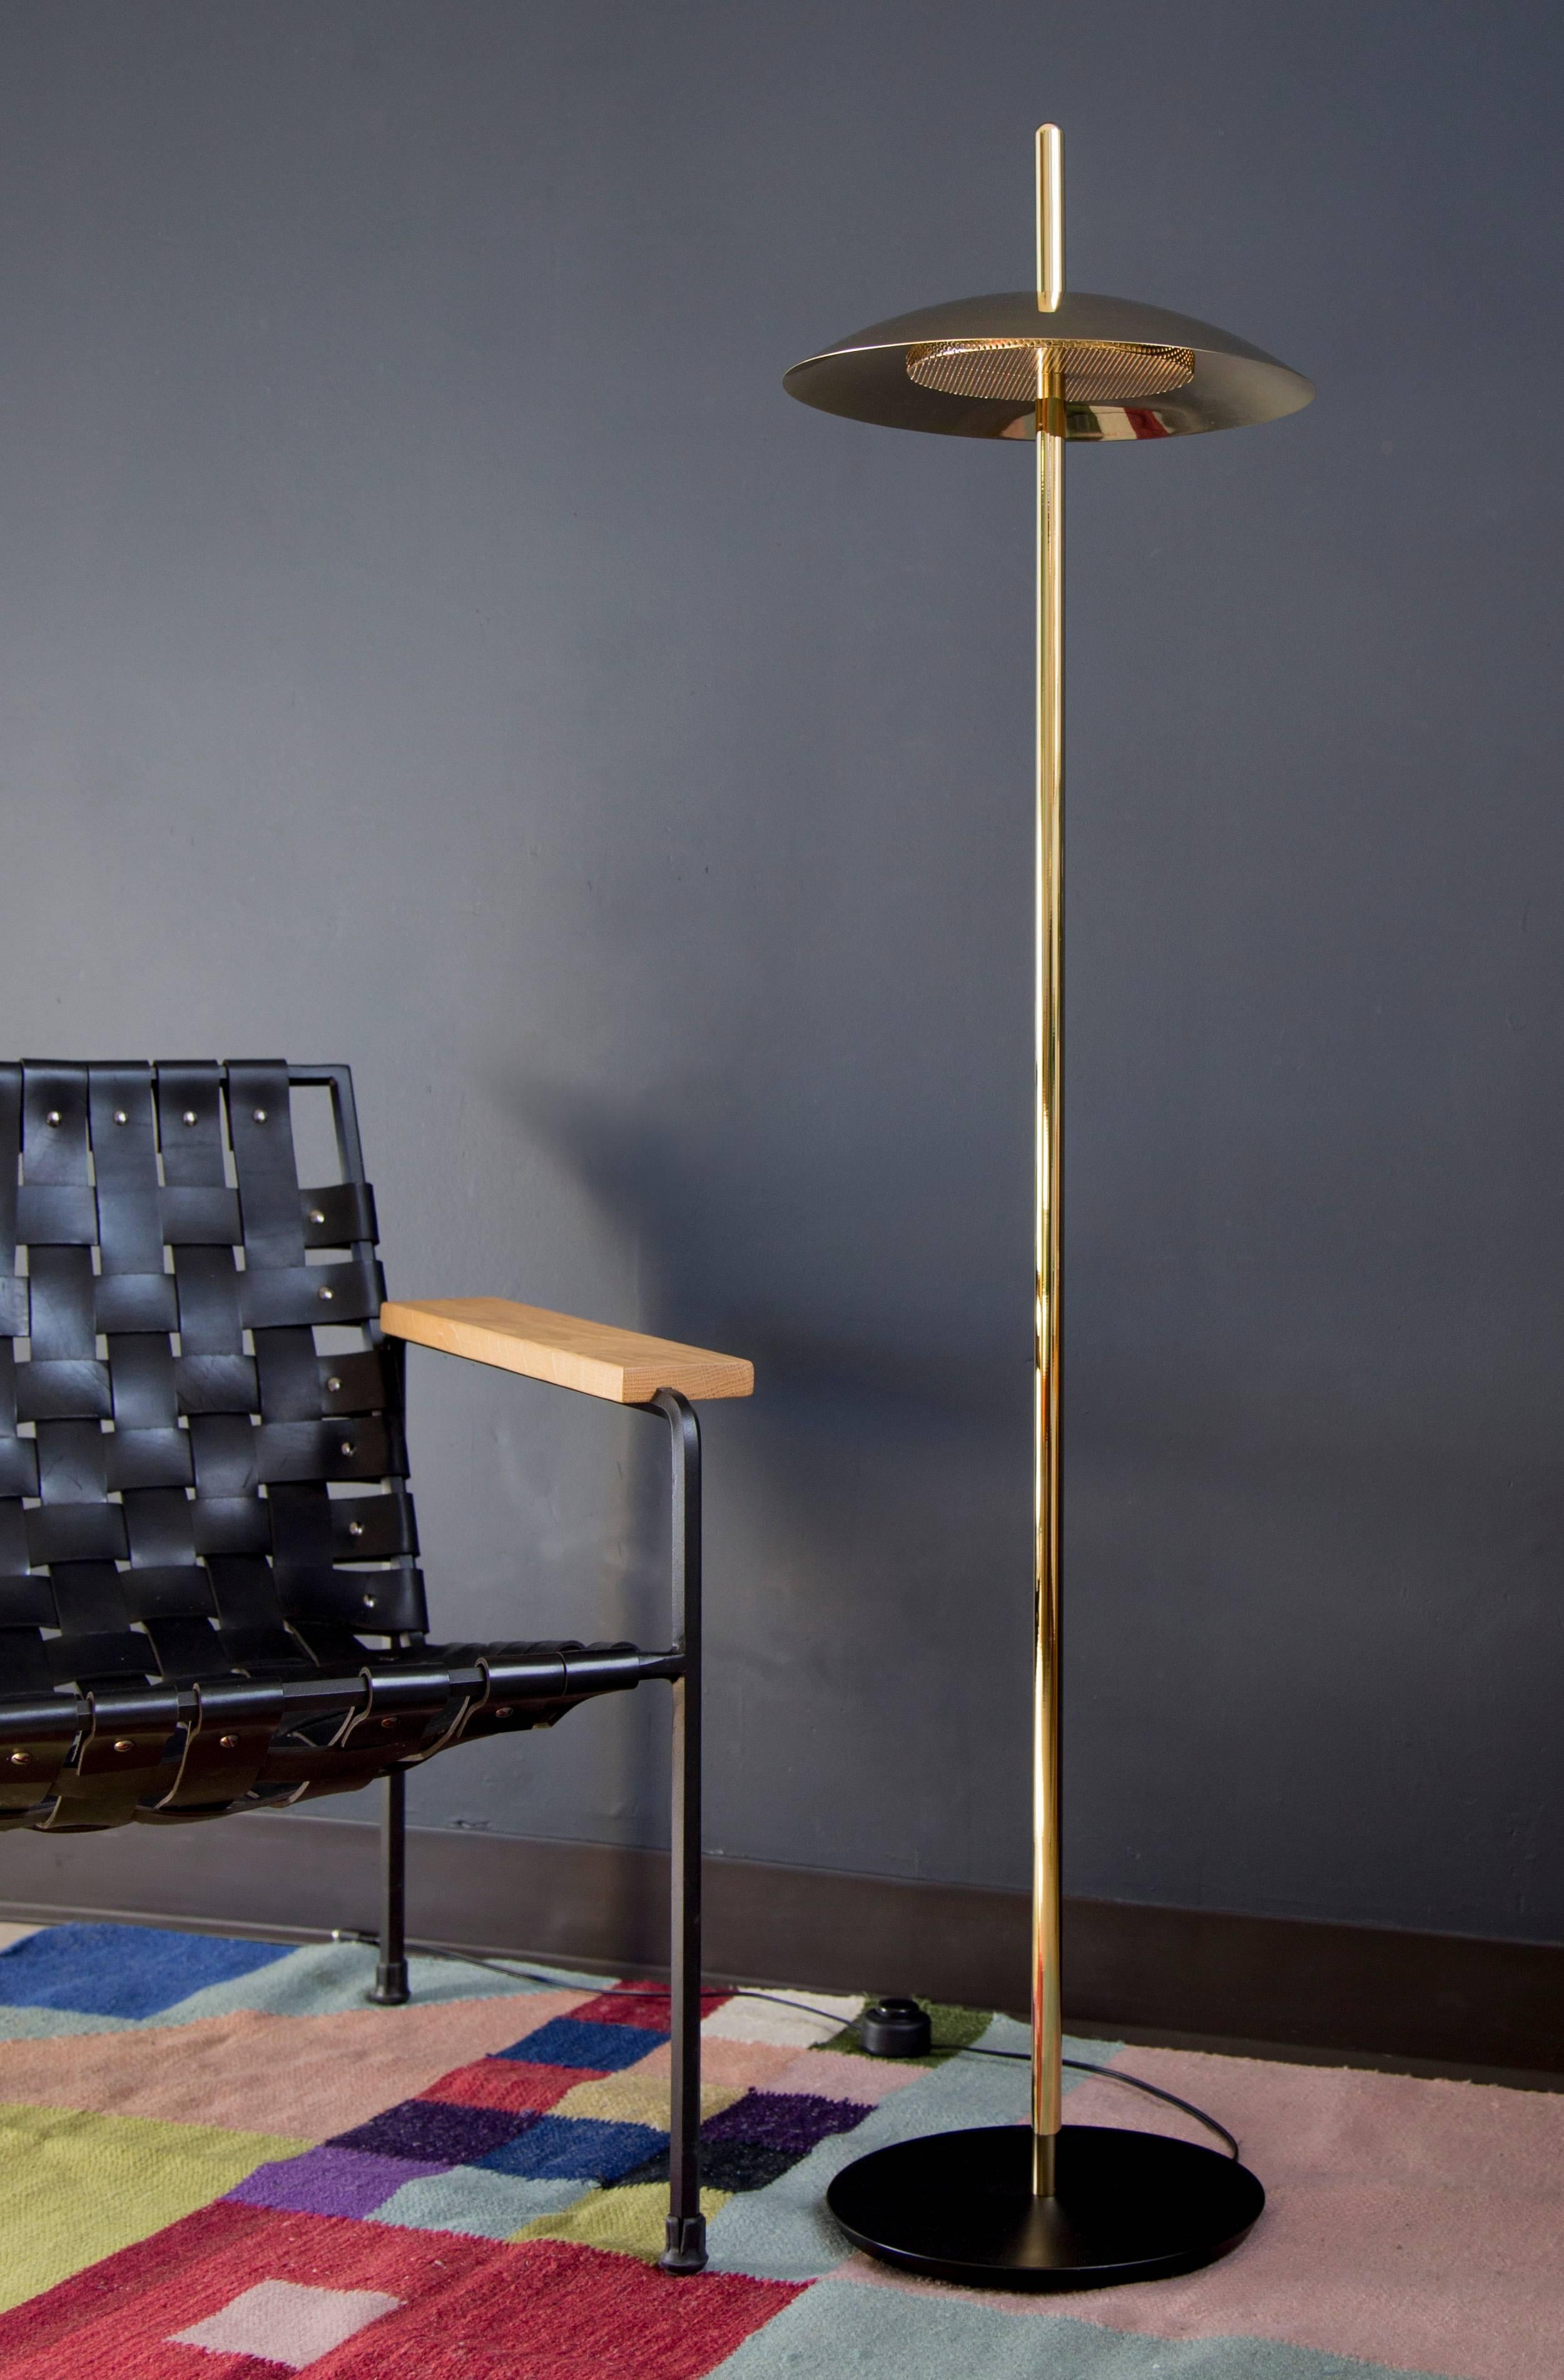 A clear distillation of line weight, the signal floor lamp stands effortlessly in virtually any setting. From a cast iron base a polished stem rises to intersect its spun aluminum shade which houses warm LEDs. Both modern and minimal, the signal